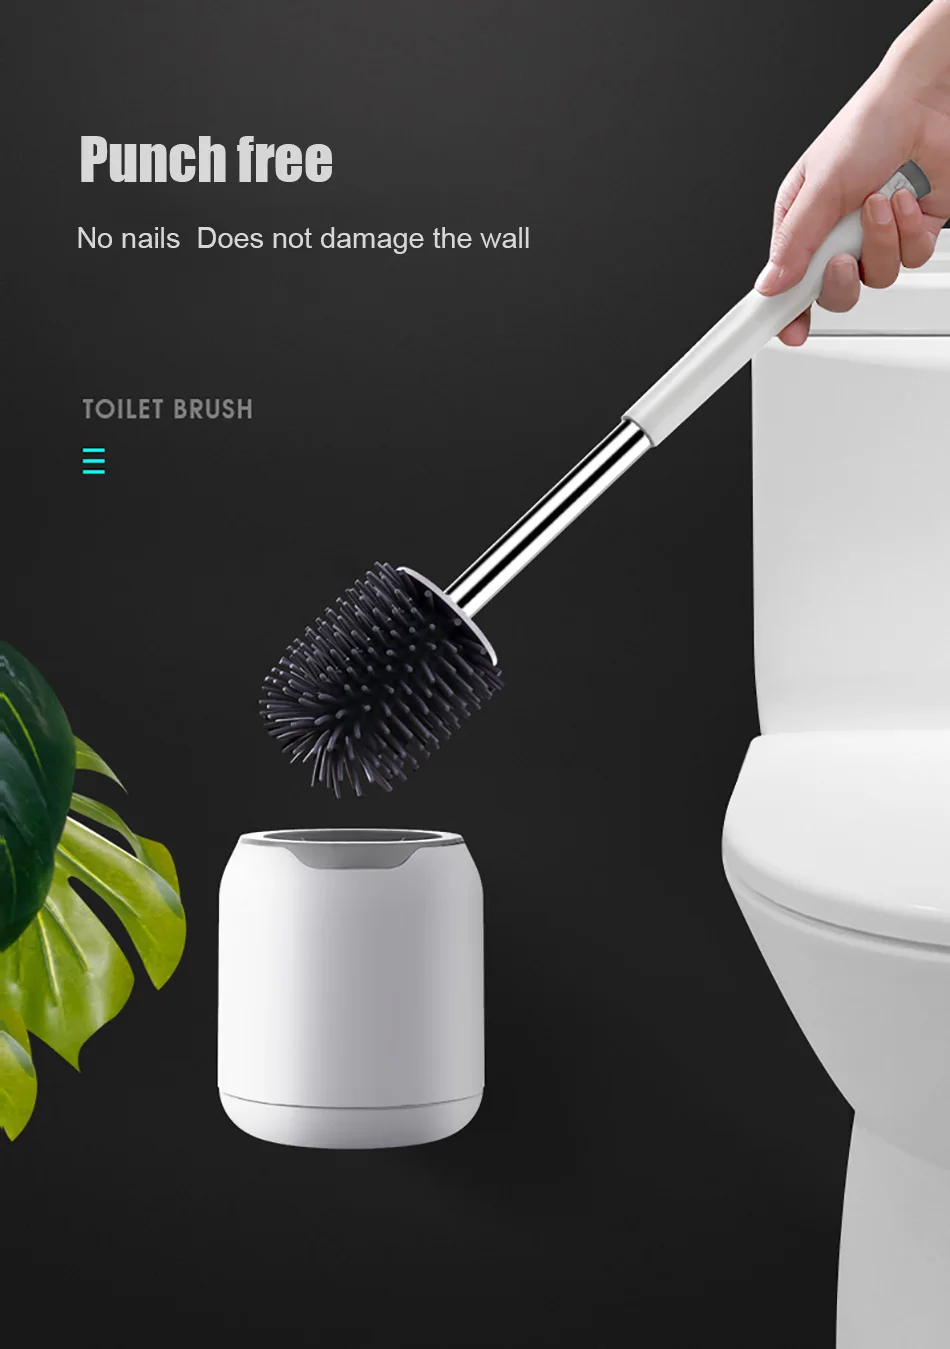 Silicone tpr toilet brush wall-mounted cleaning brush for bathroom household cleaning product bathroom accessories